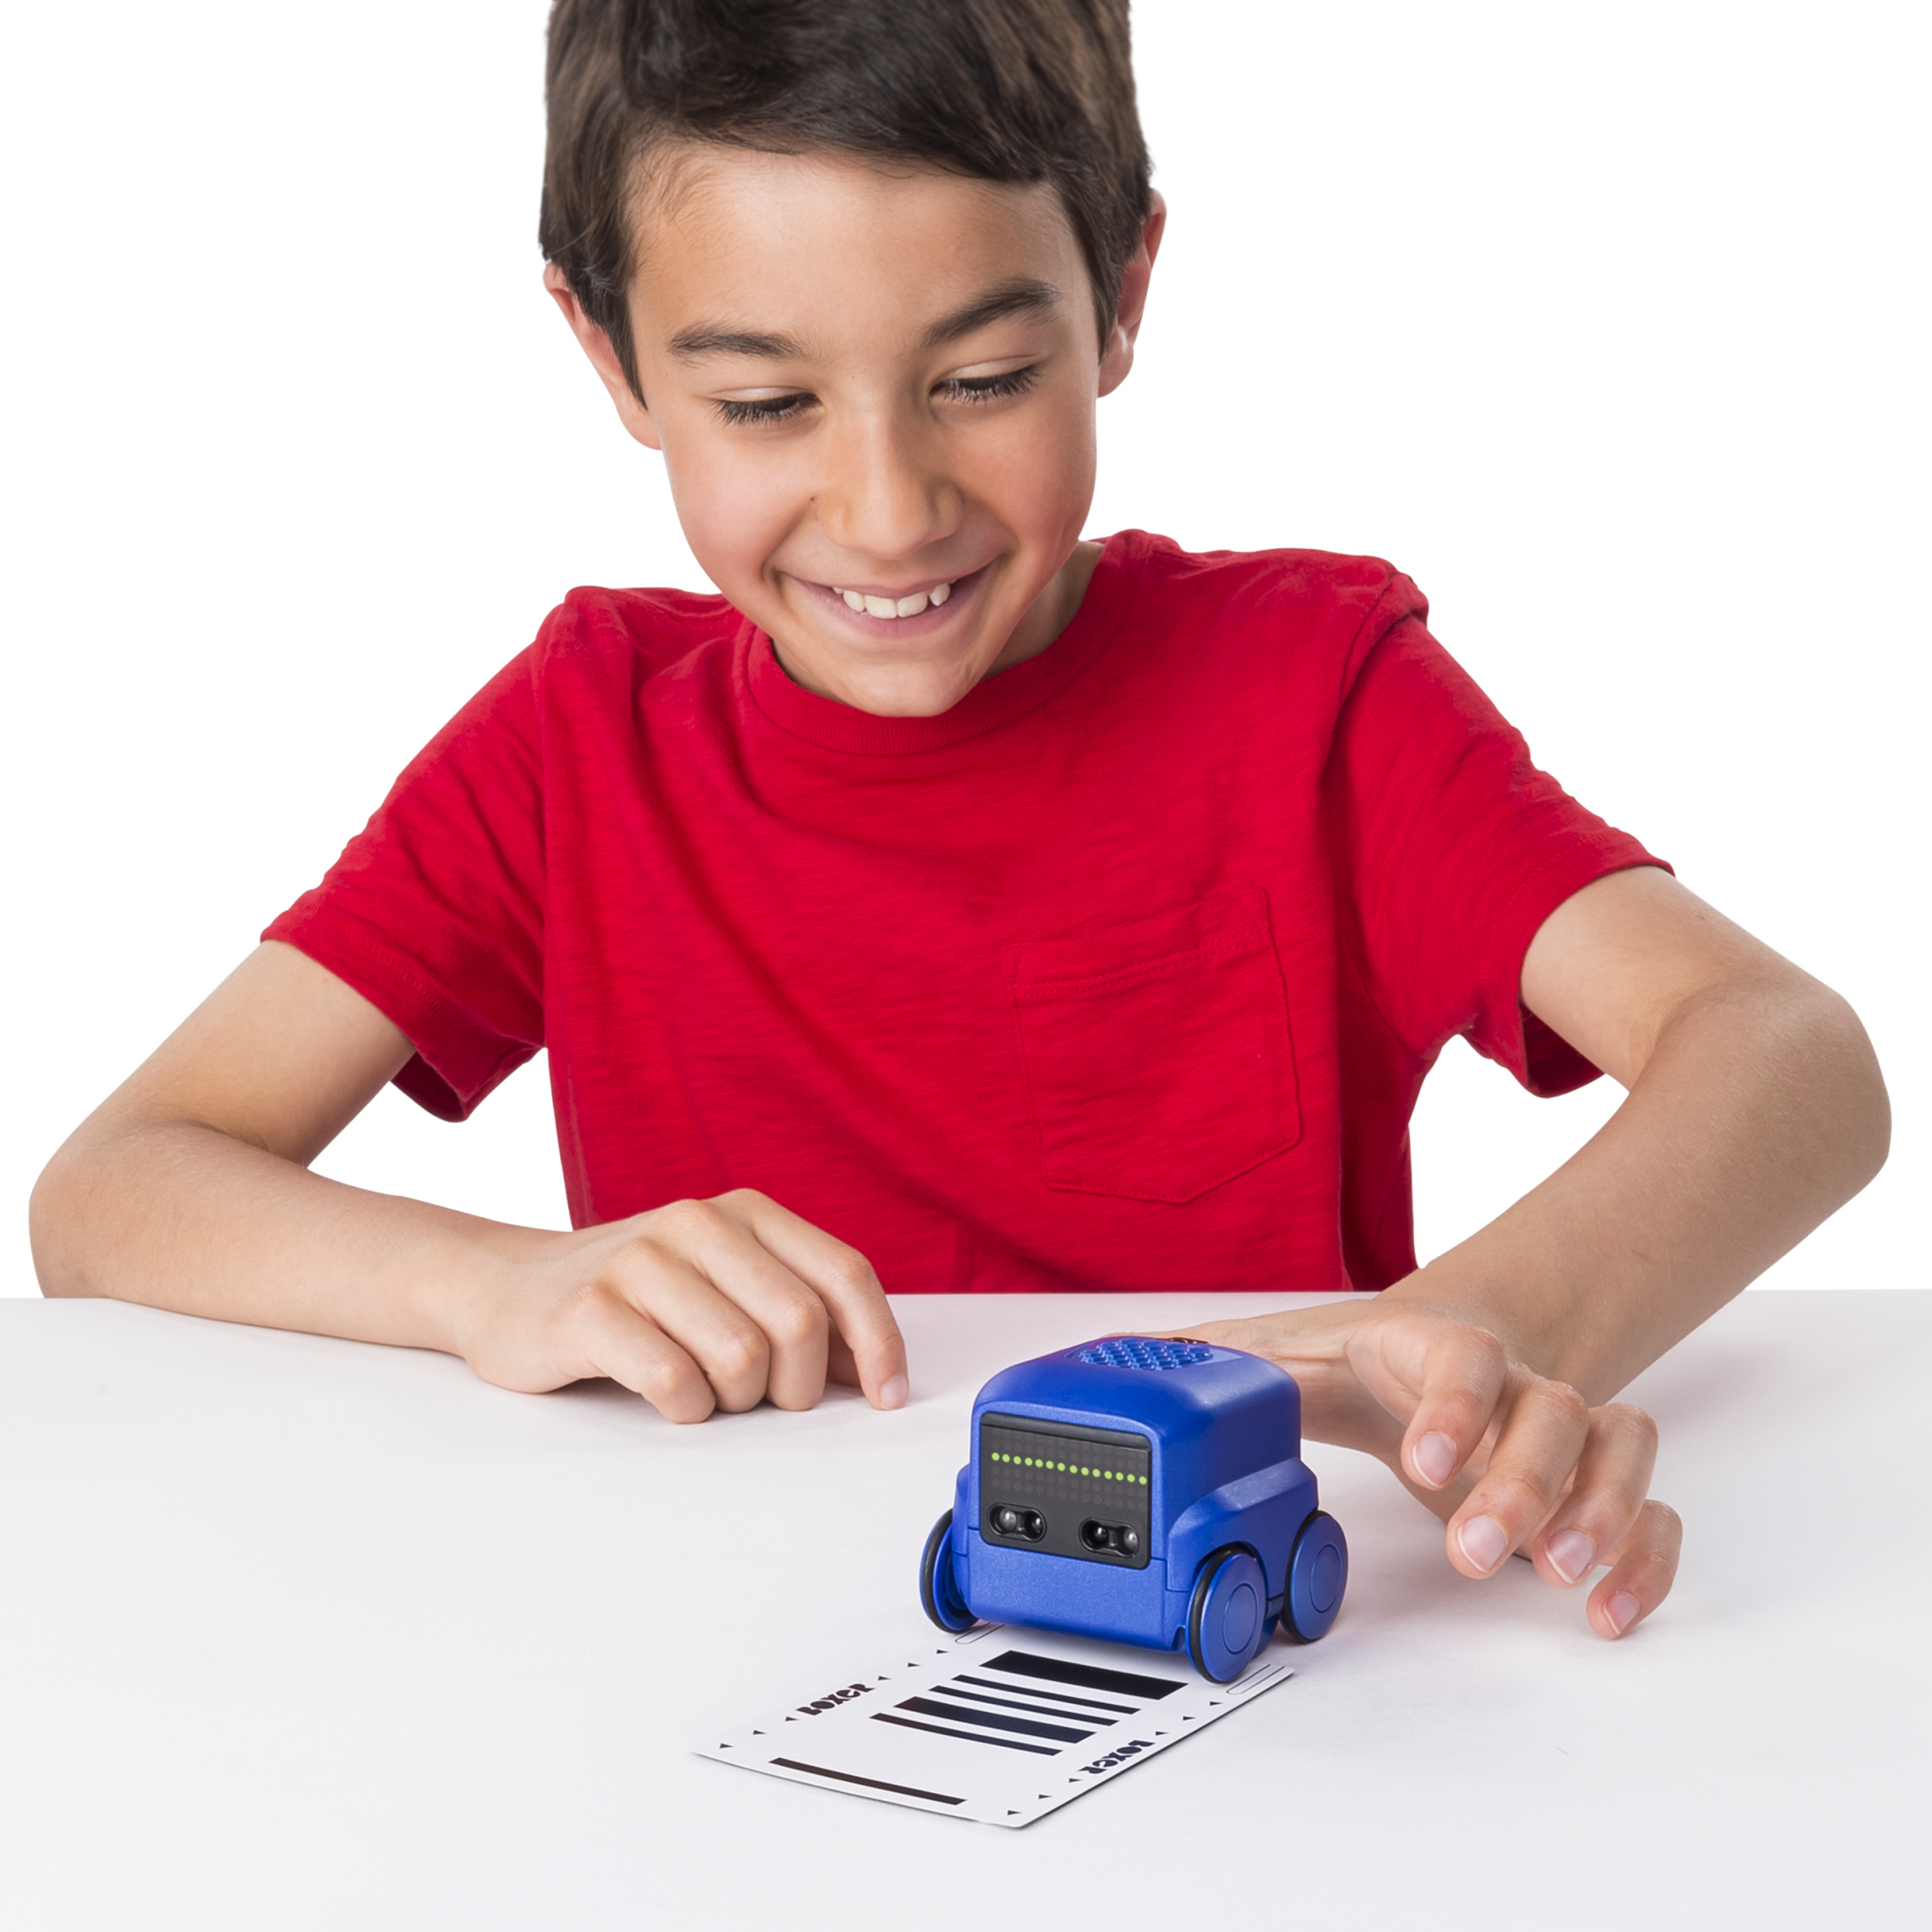 Boxer - Interactive A.I. Robot Toy (Blue) with Personality and Emotions, for Ages 6 and up - image 3 of 14